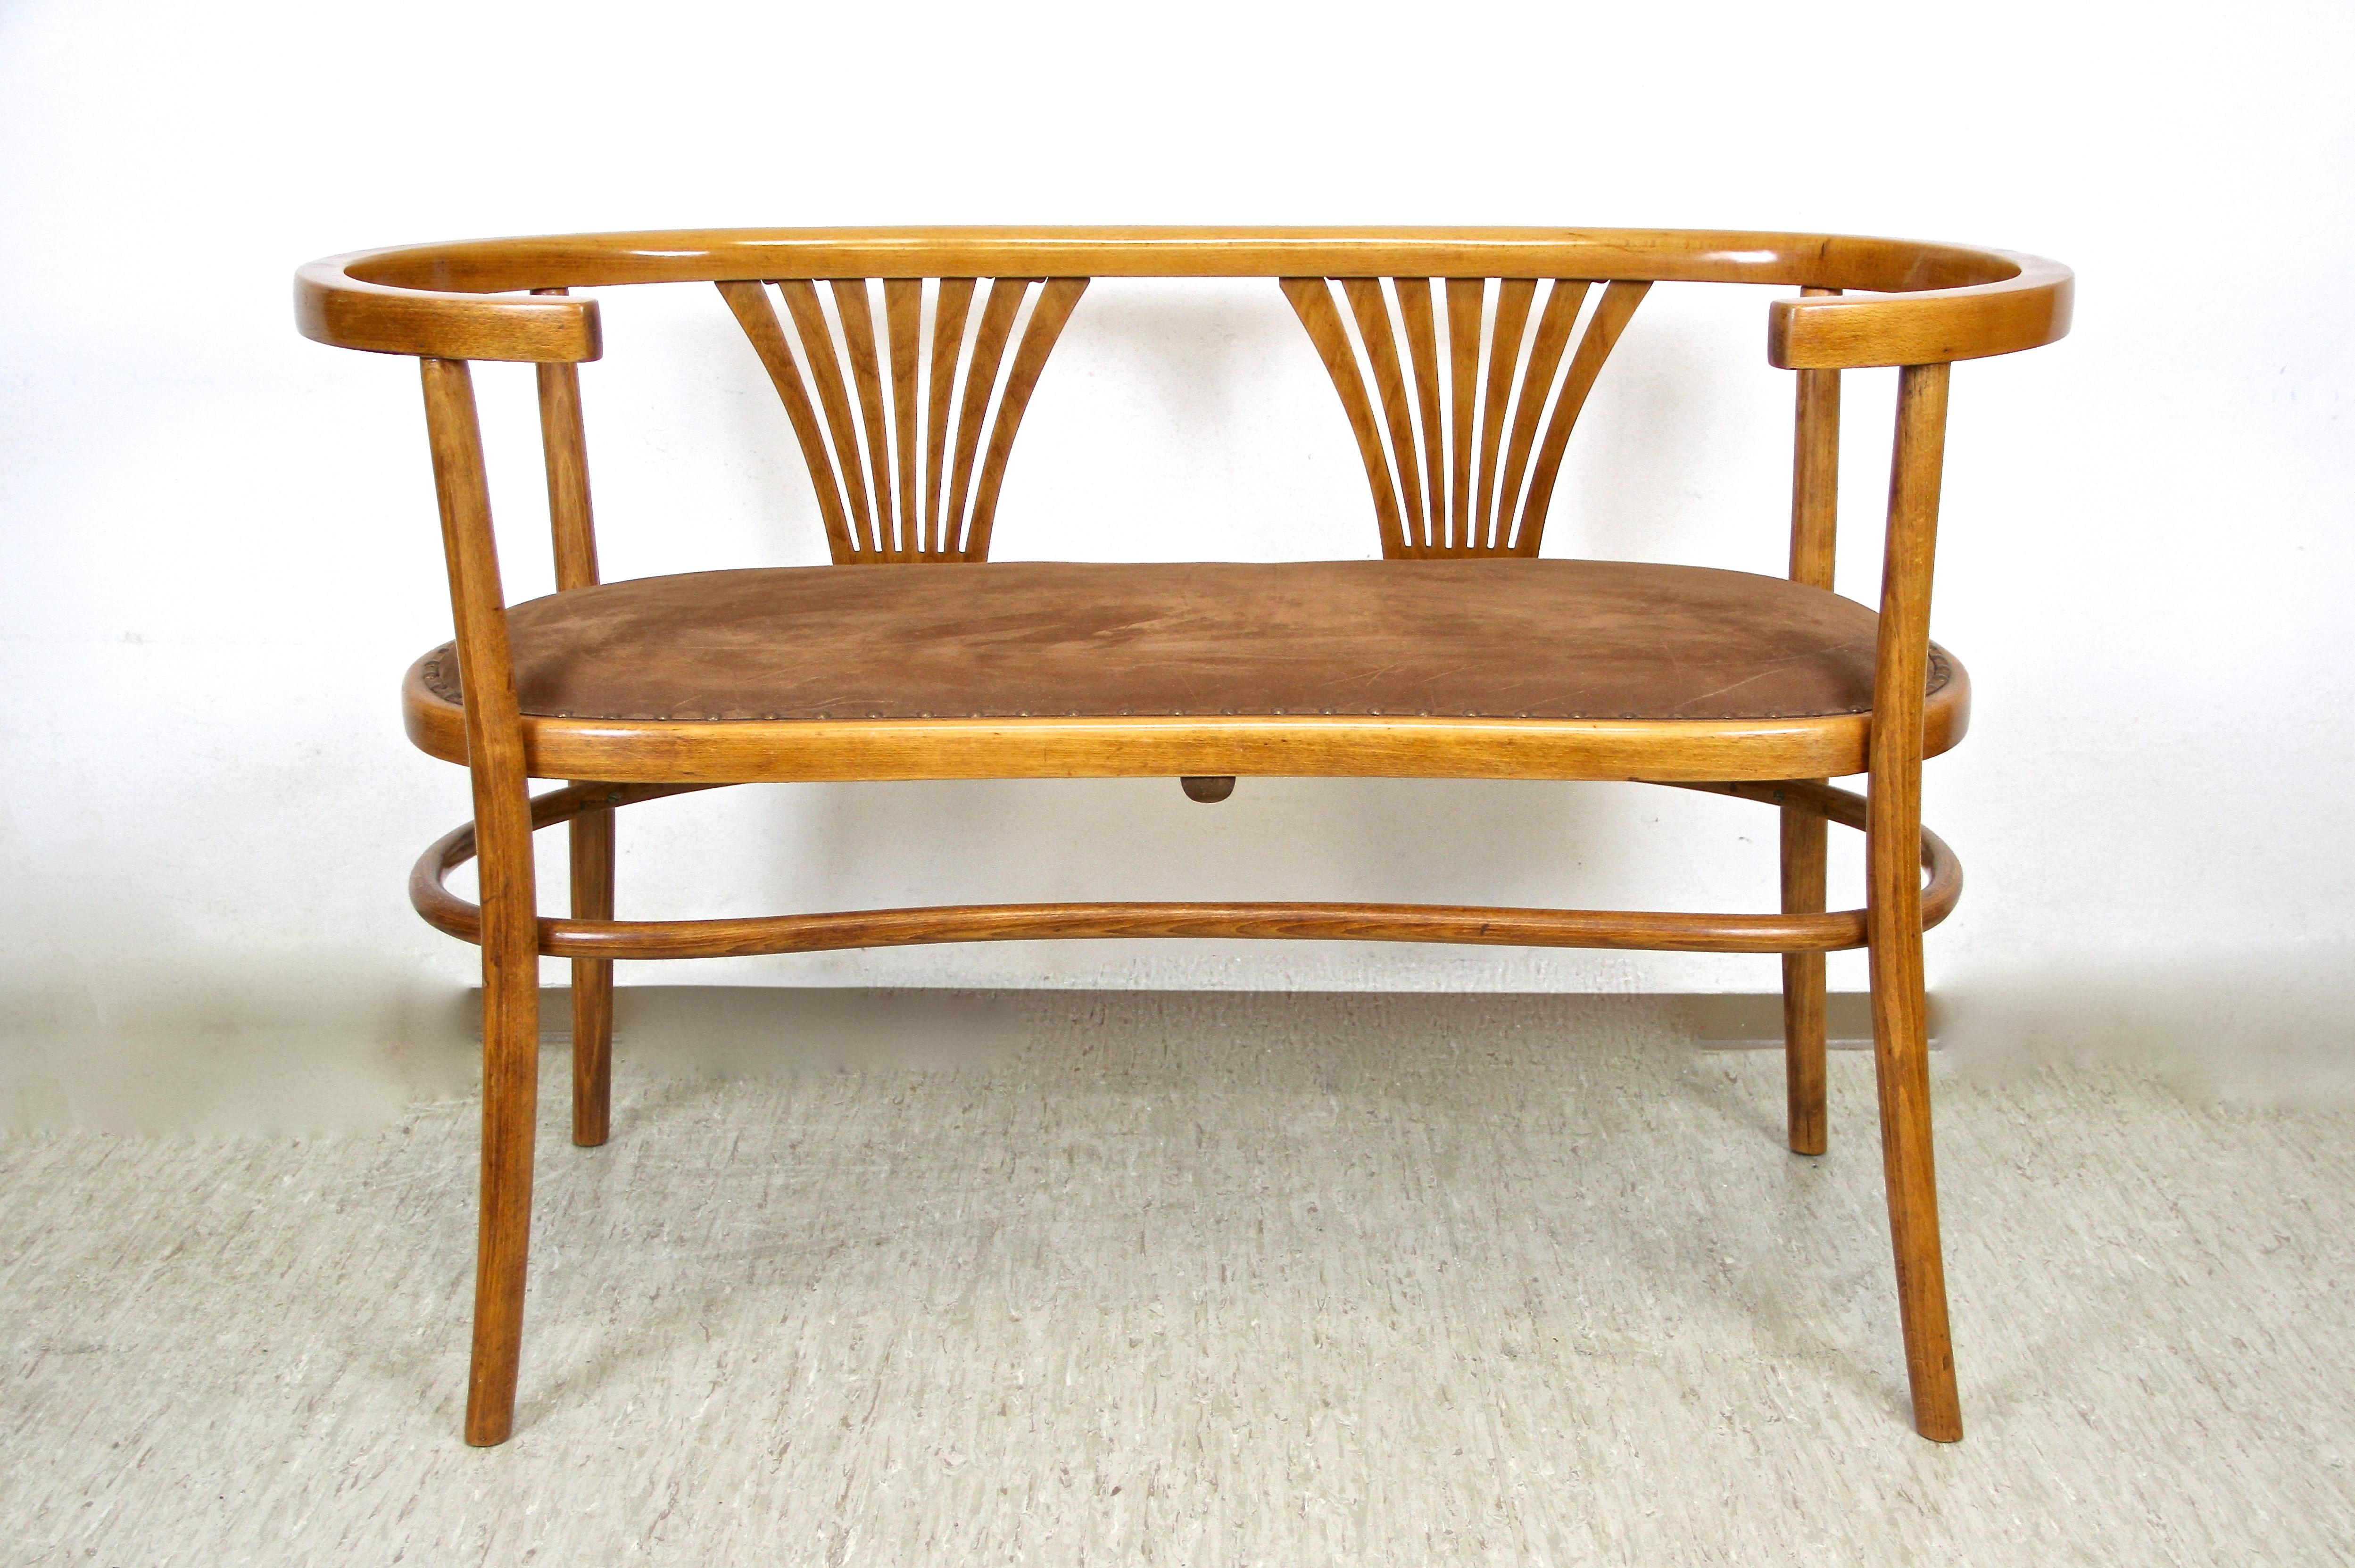 Unusual bentwood seating set artfully processed by the Czechoslovakian bentwood manufactory of Brief, circa 1910. The exceptional shaped bench as well as the two armchairs were made of beechwood that was bent under steam and high pressure. All items